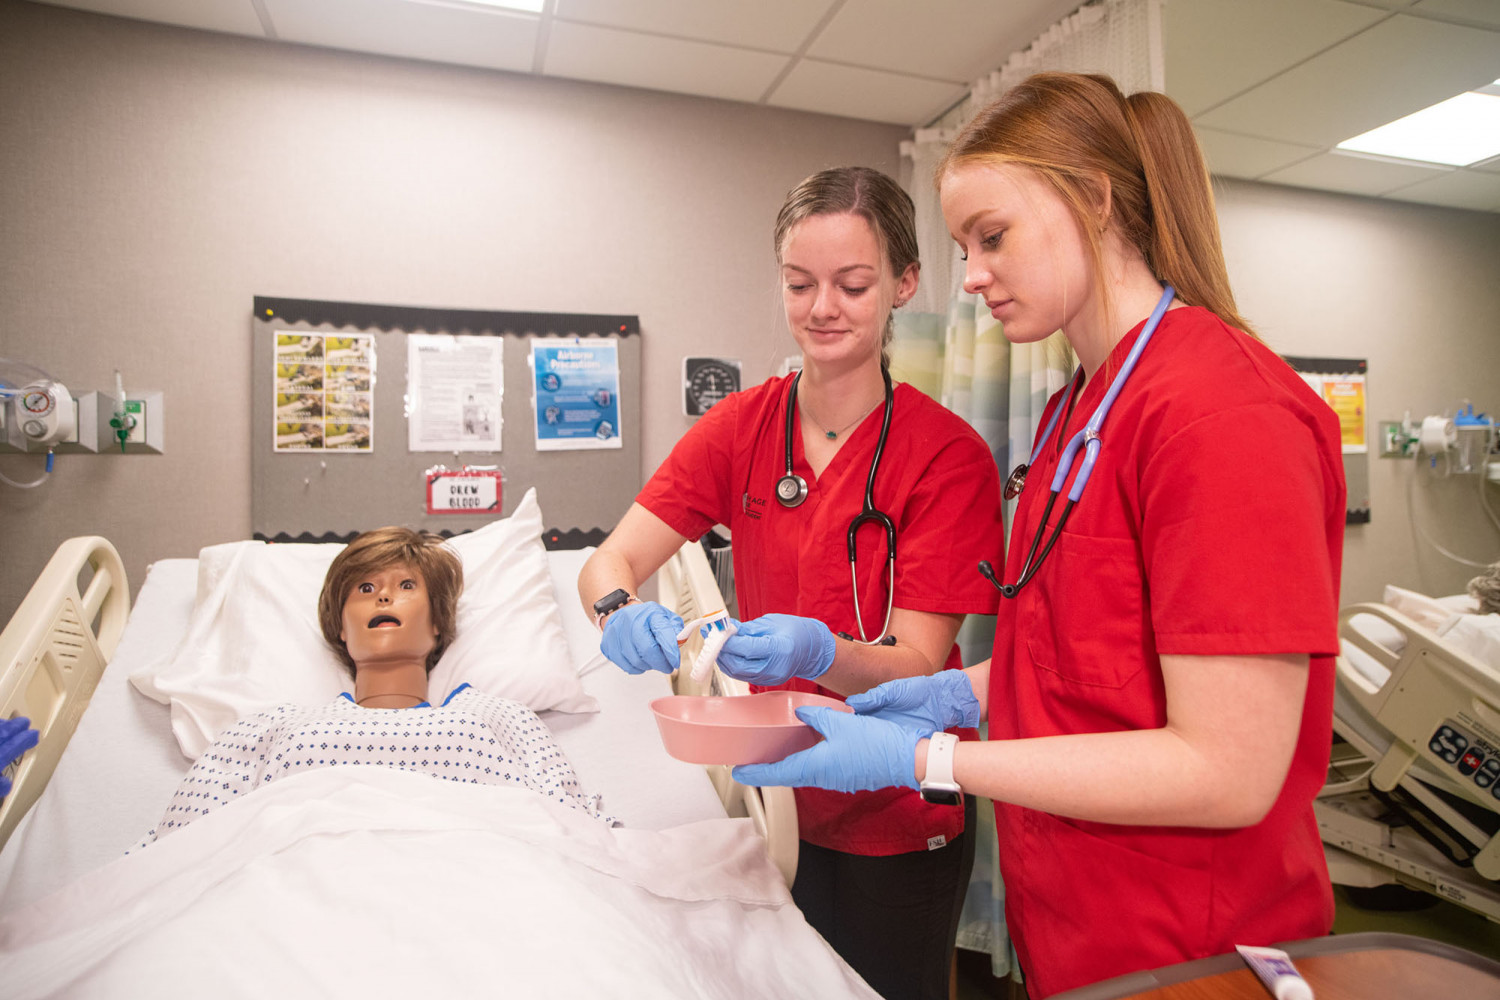 Students in Carthage's popular nursing major receive hands-on training in the nursing simulation lab.